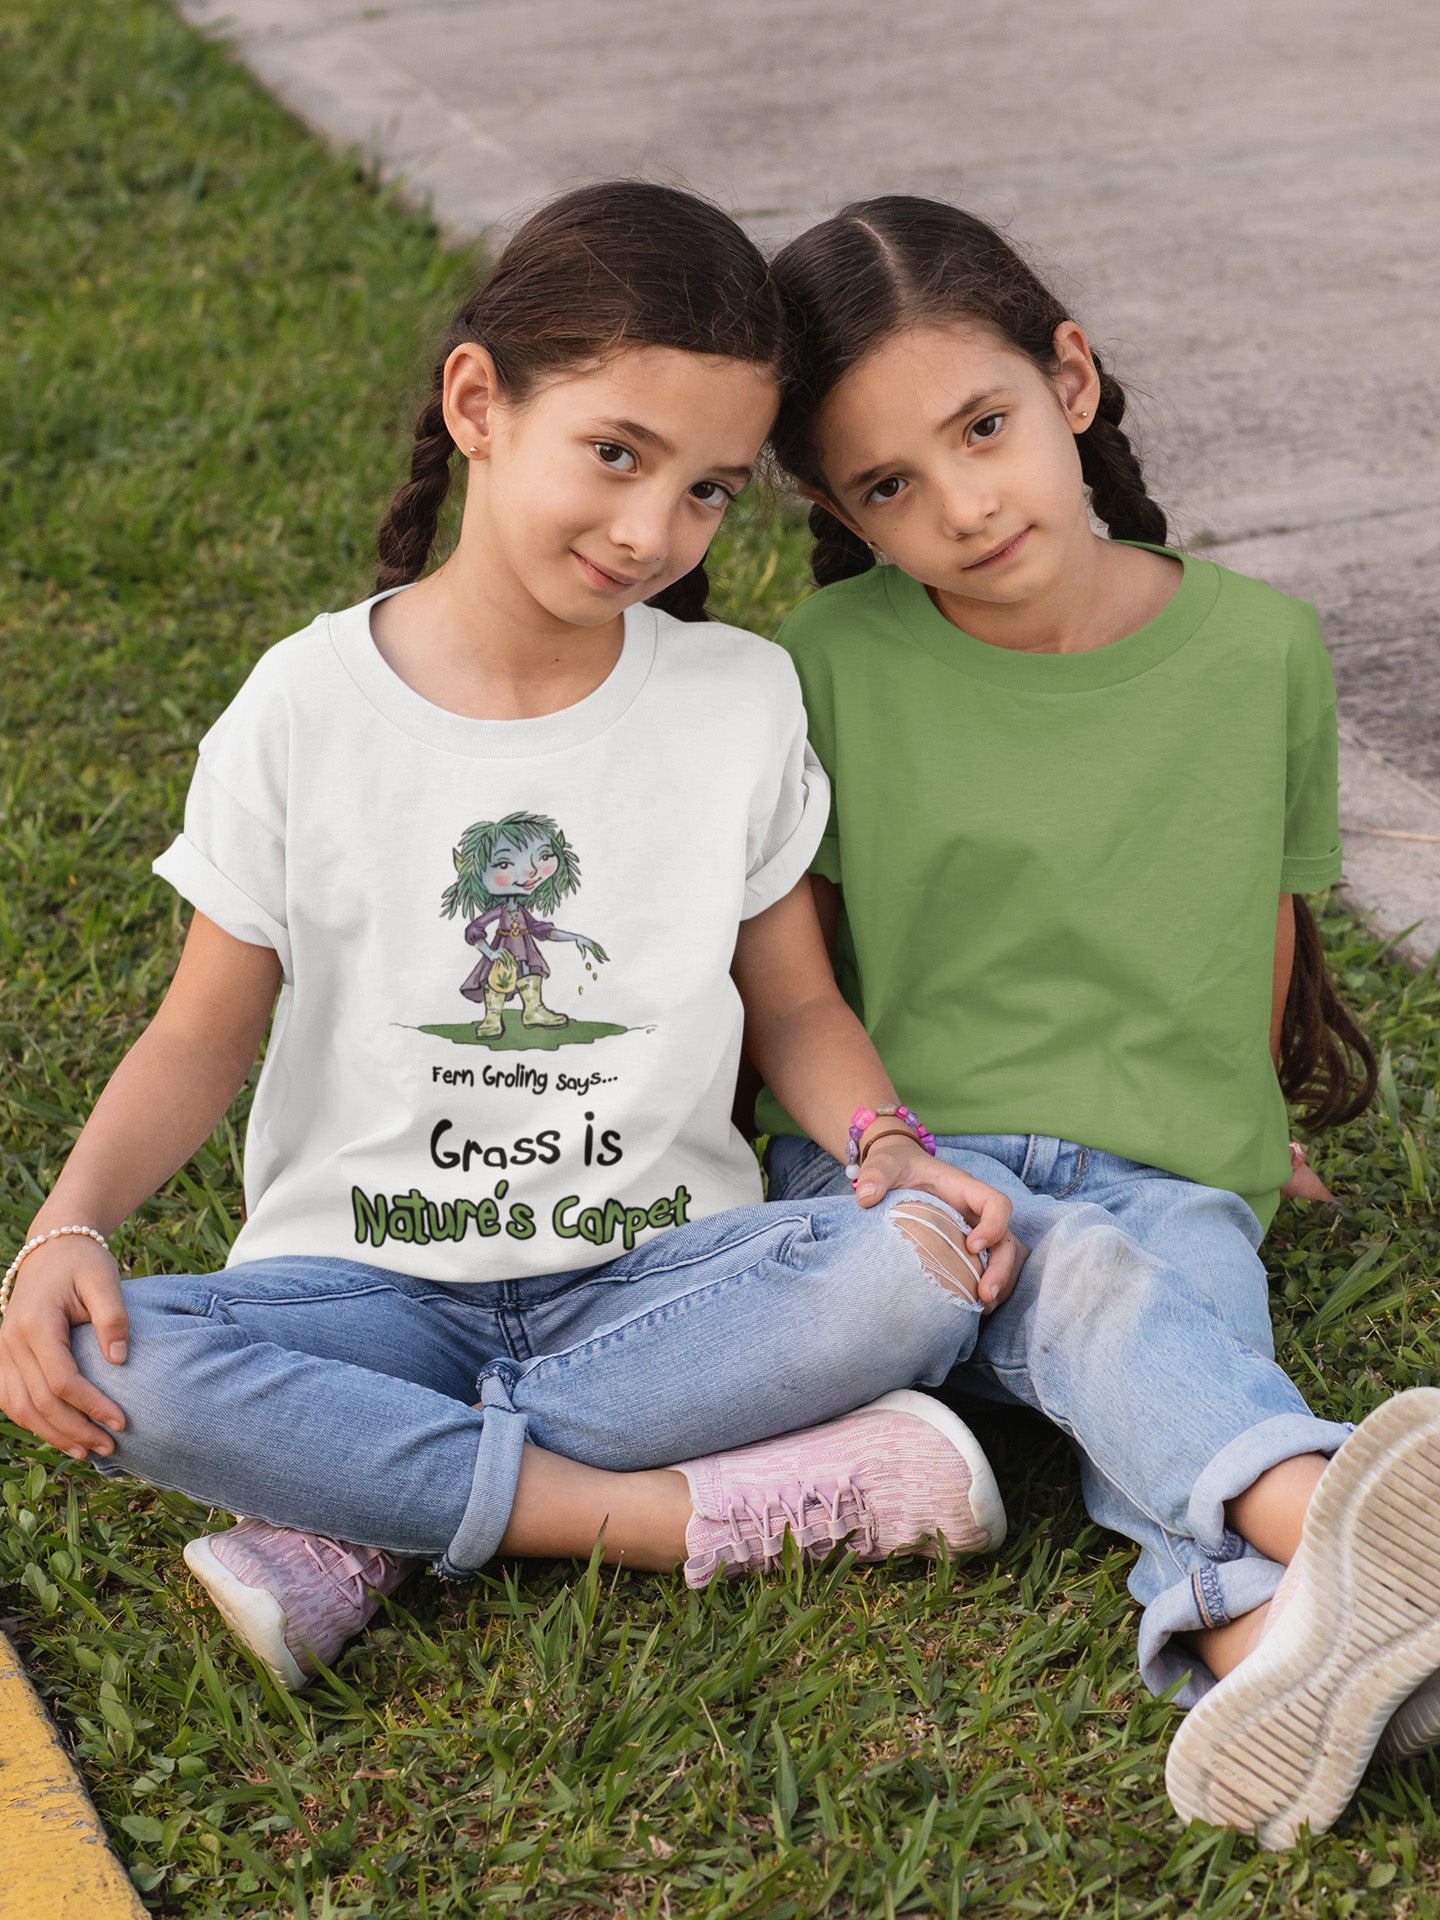 A white official Grolings kids' t-shirt, featuring the phrase 'Fern Groling says... Grass is Nature’s Carpet.' The t-shirt showcases Fern Groling, standing on green ground and planting grass seeds. The scene emphasises the importance of grass as a natural carpet, symbolising the lushness and vitality it brings to the environment. Worn by a twin girl sitting on a grass path with her sister.